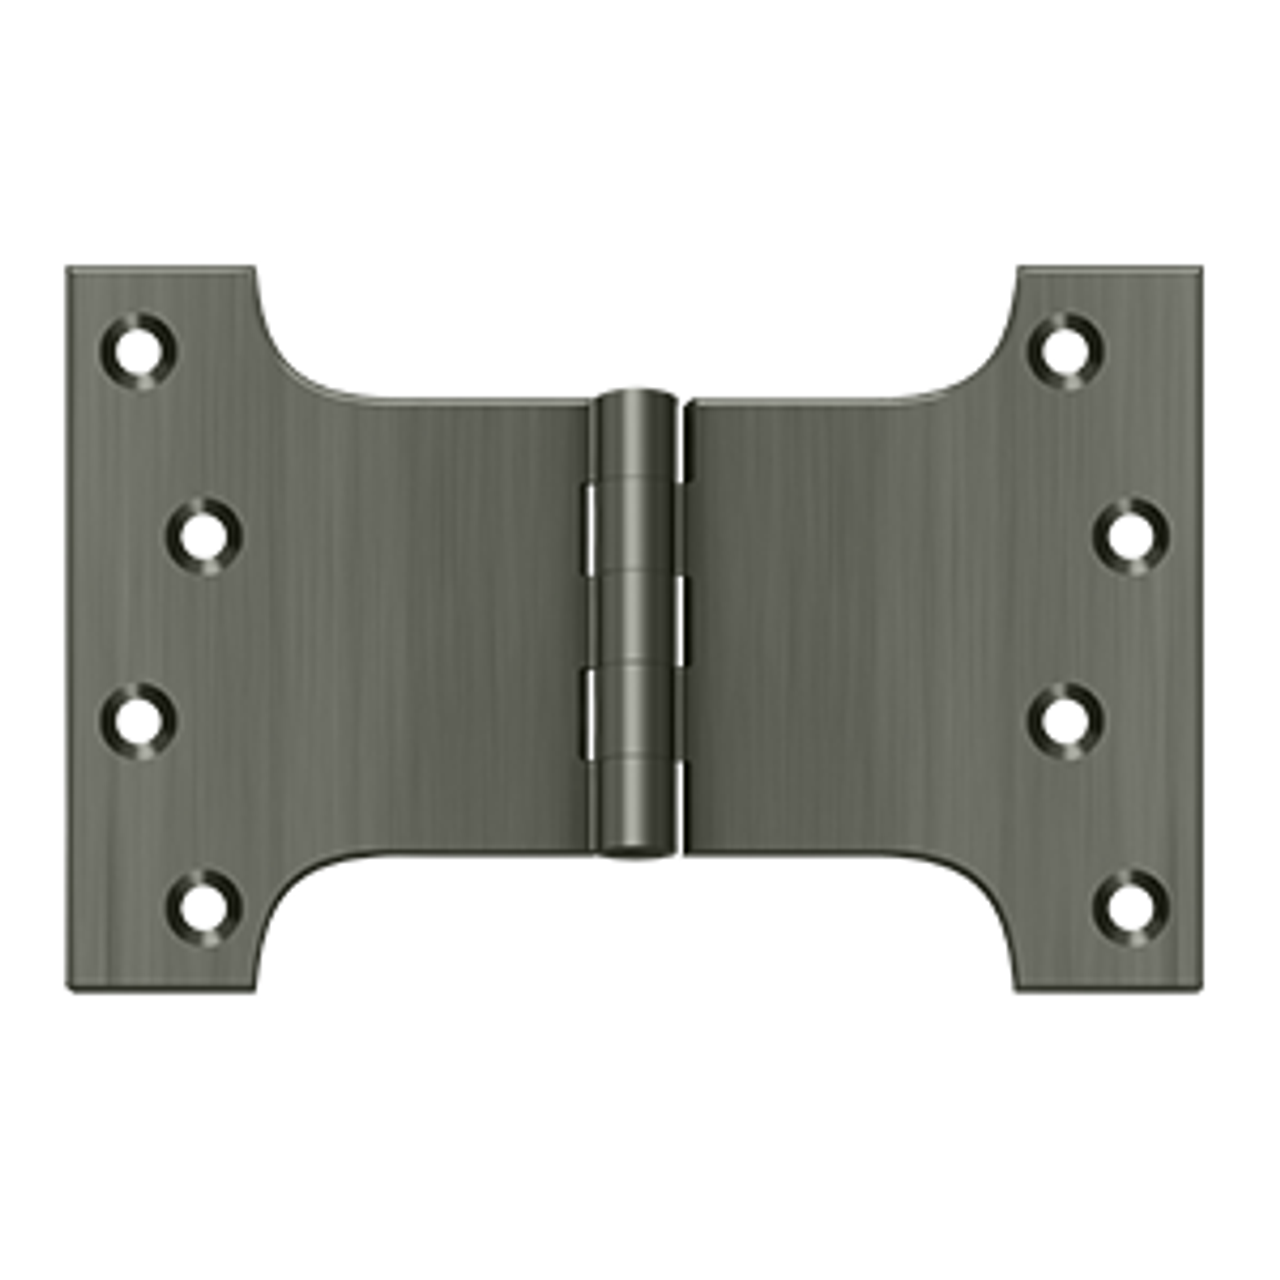 Deltana DSPA4060 4" X 6" PARLIAMENT HINGE SOLID BRASS